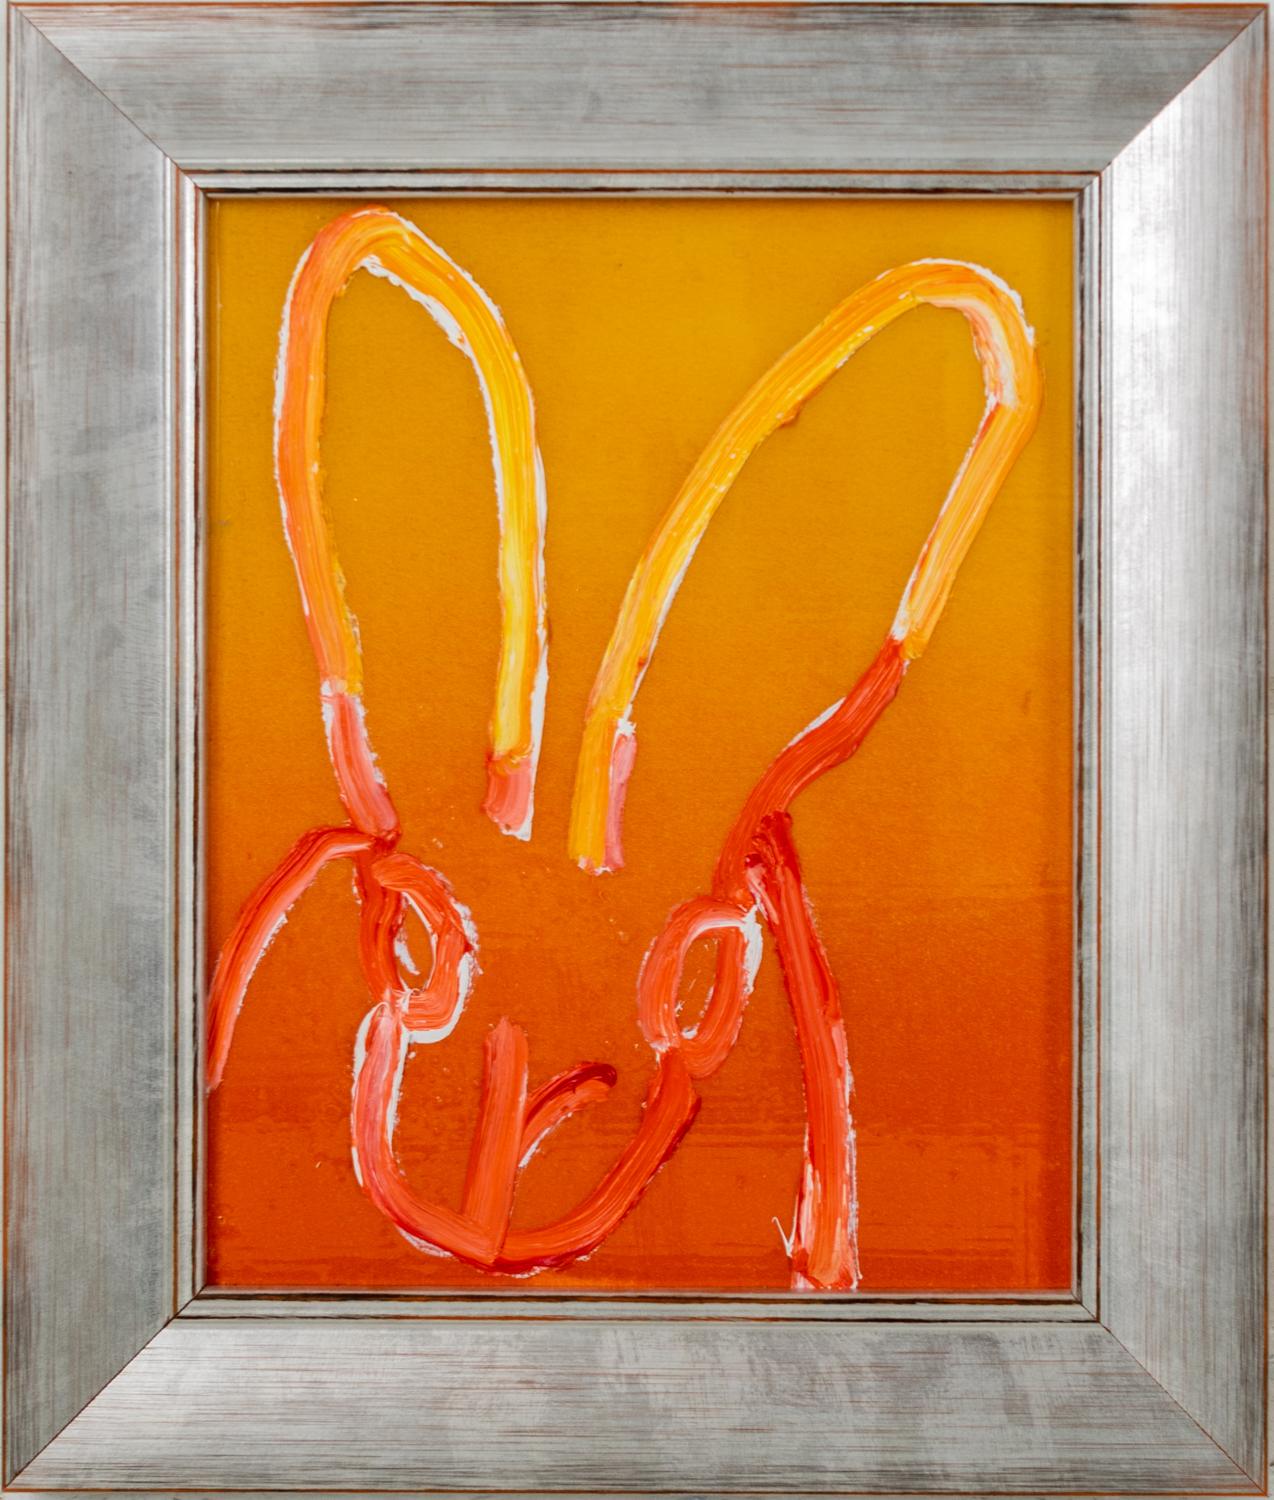 Hunt Slonem Animal Painting - Untitled Framed "Bunny Painting" Yellow Orange Oil Painting in Vintage Frame